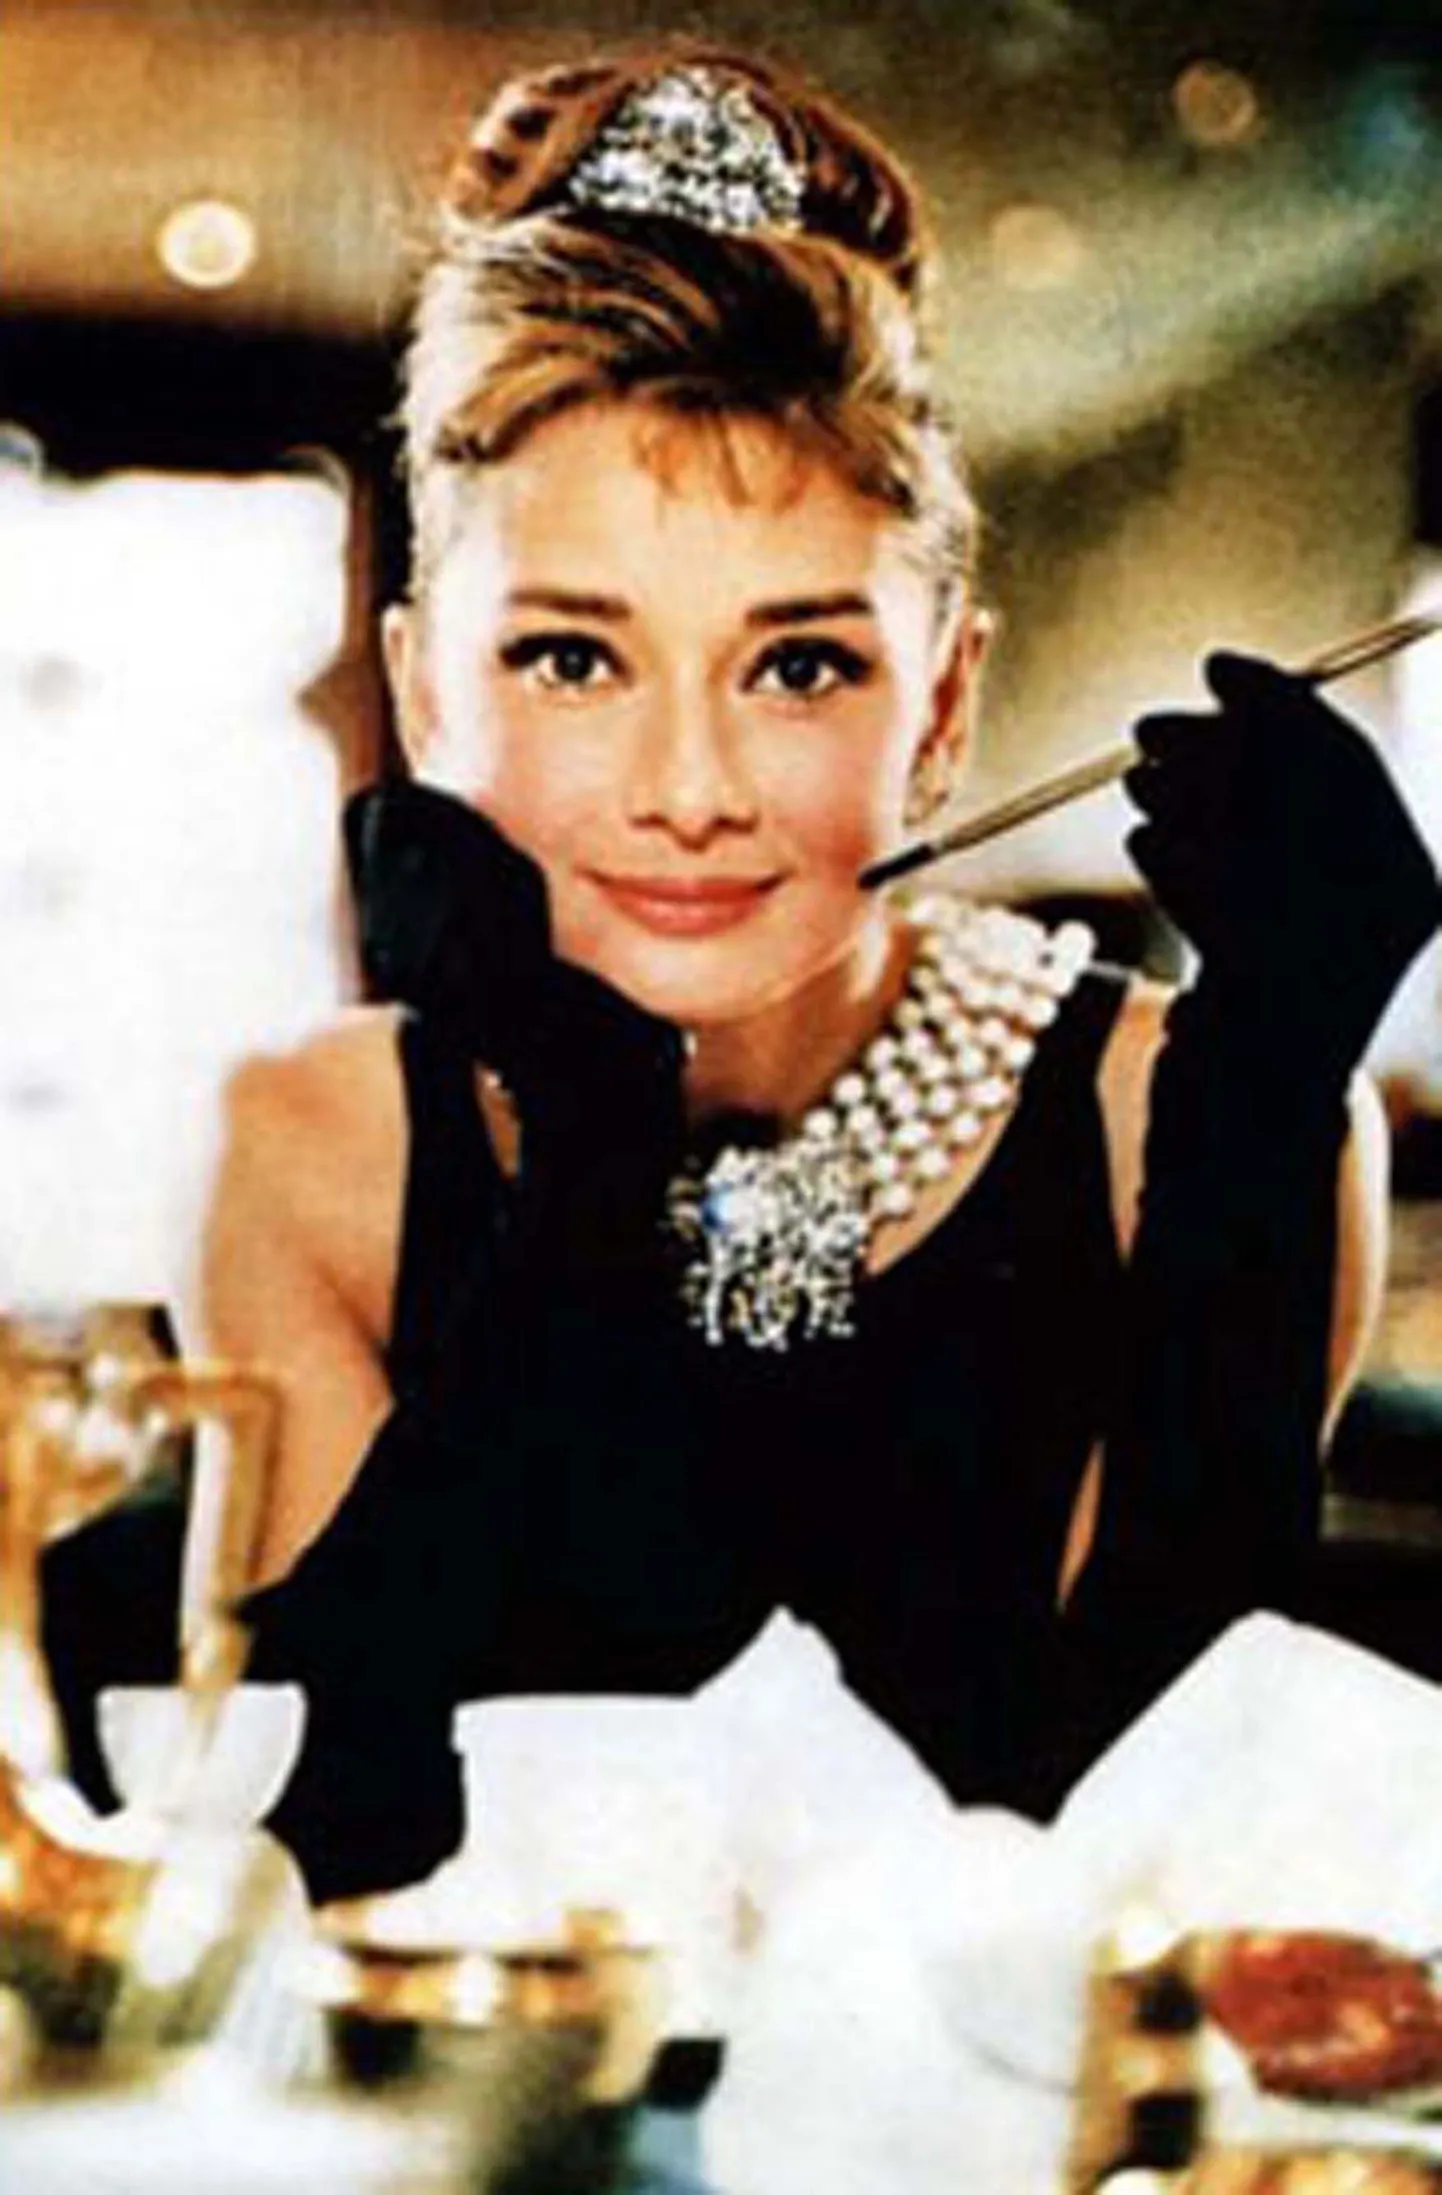 06/12/06

The black Givenchy gown worn by Audrey Hepburn in the film "Breakfast at Tiffany's" sold at auction Tuesday for $807,000.
The price, paid by a telephone bidder, was almost six times the highest pre-sale estimate. The iconic garment had been expected to fetch $98,000 to $138,000 as part of a sale of film and television memorabilia at Christie's auction house in London.
Proceeds from the sale will go to the charity City of Joy Aid, which helps India's poor. Hepburn wore the dress for one of her best-known roles, as eccentric Manhattan socialite Holly Golightly in the 1961 film adaptation of Truman Capote's novel.

Pic supplied: PLANET PHOTOS

Planet Photos Contact Number: 0208 883 1438